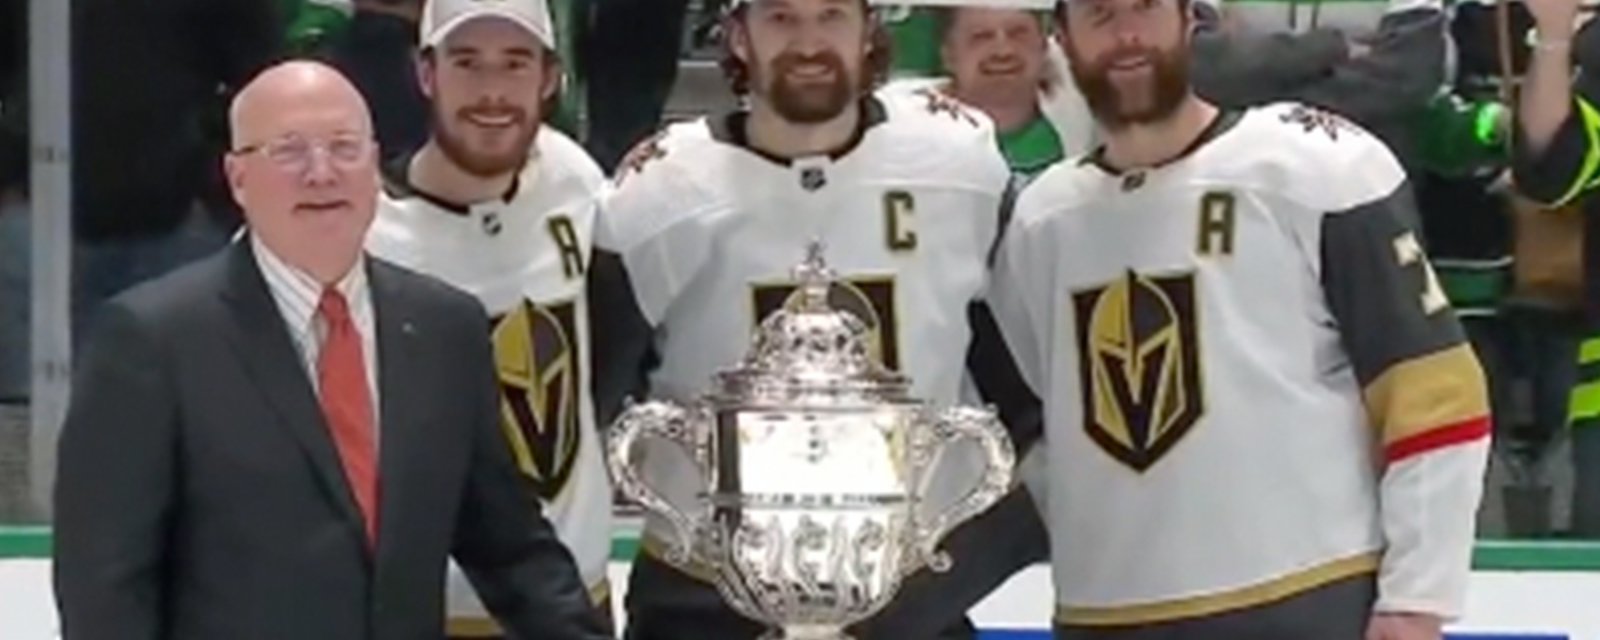 Stone, Pietrangelo, Smith and the Golden Knights do NOT touch the Clarence Campbell Bowl